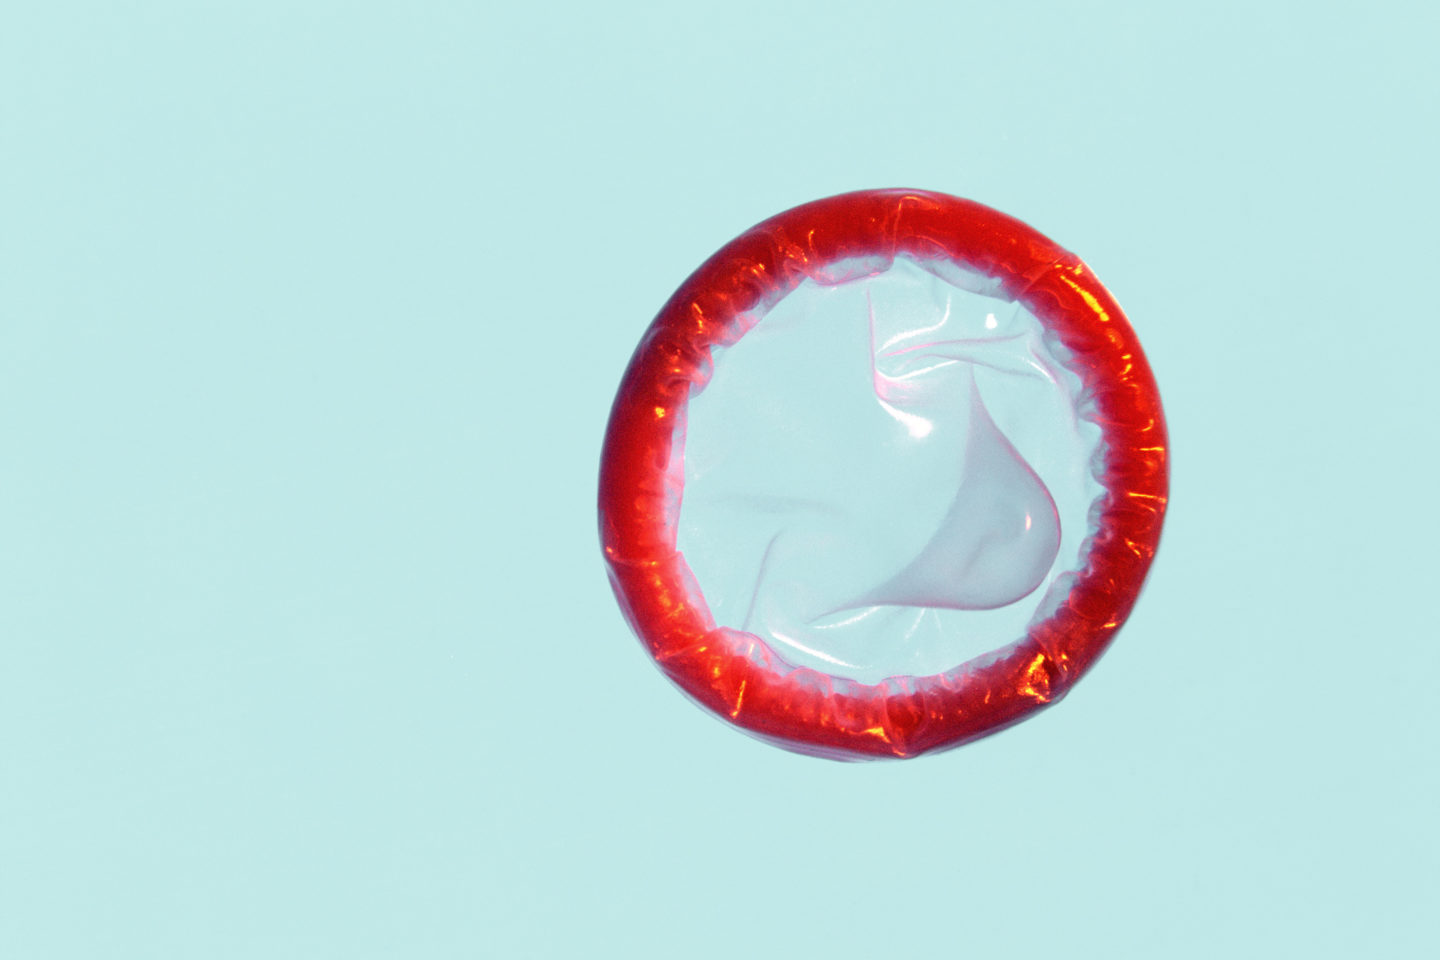 New Study Shows That Condoms Are Being Used Less and Less